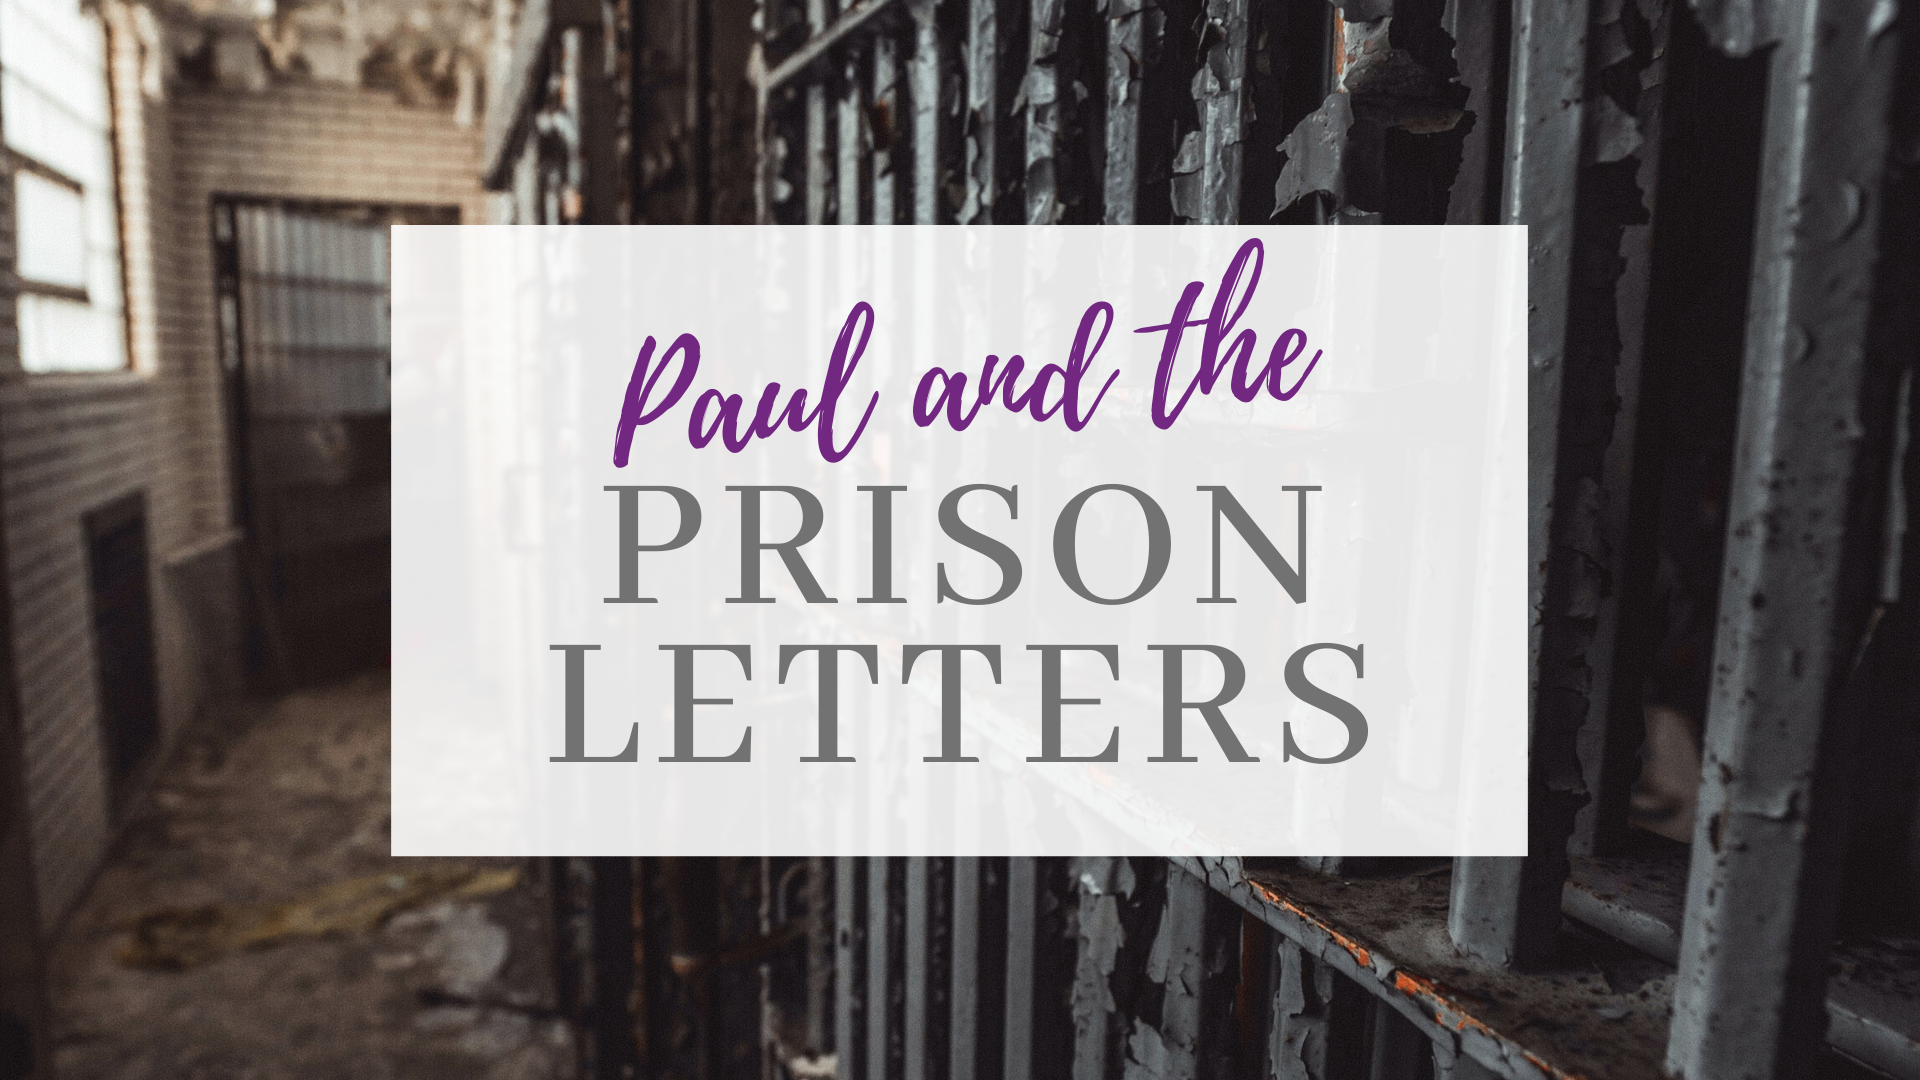 NT Wright Online Paul and the Prison Letters Certification